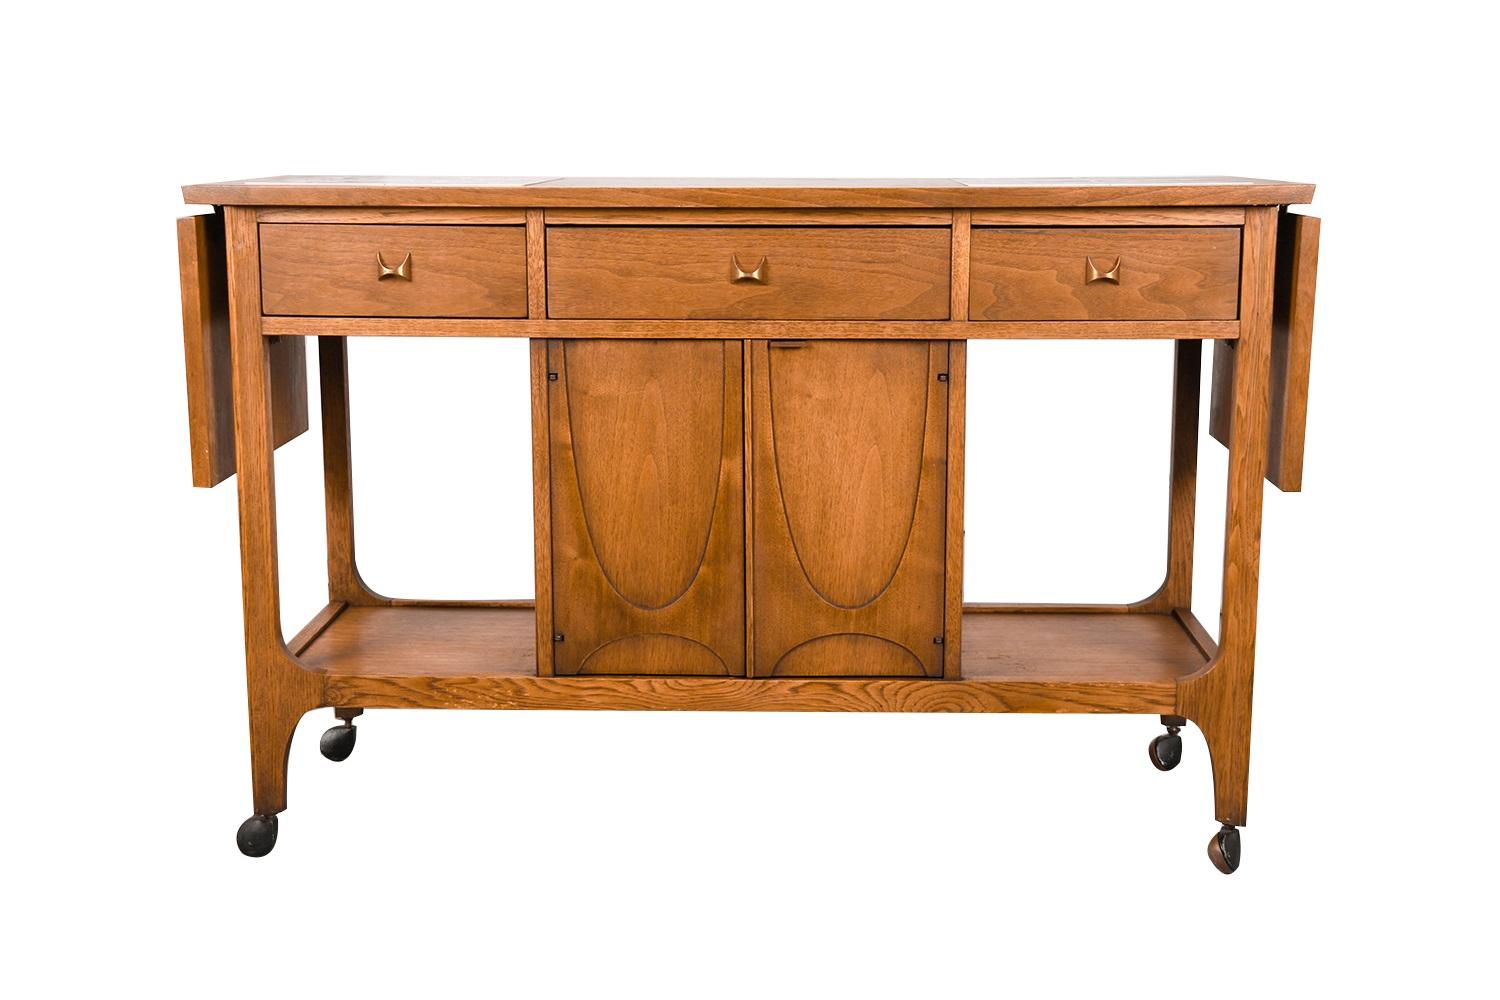 Absolutely beautiful and functional Mid-Century modern drop leaf tile top bar cart console table circa 1960s, from the Brasilia Premier collection by Broyhill Furniture. This absolute jewel remains in nearly pristine condition. The Brasilia line is